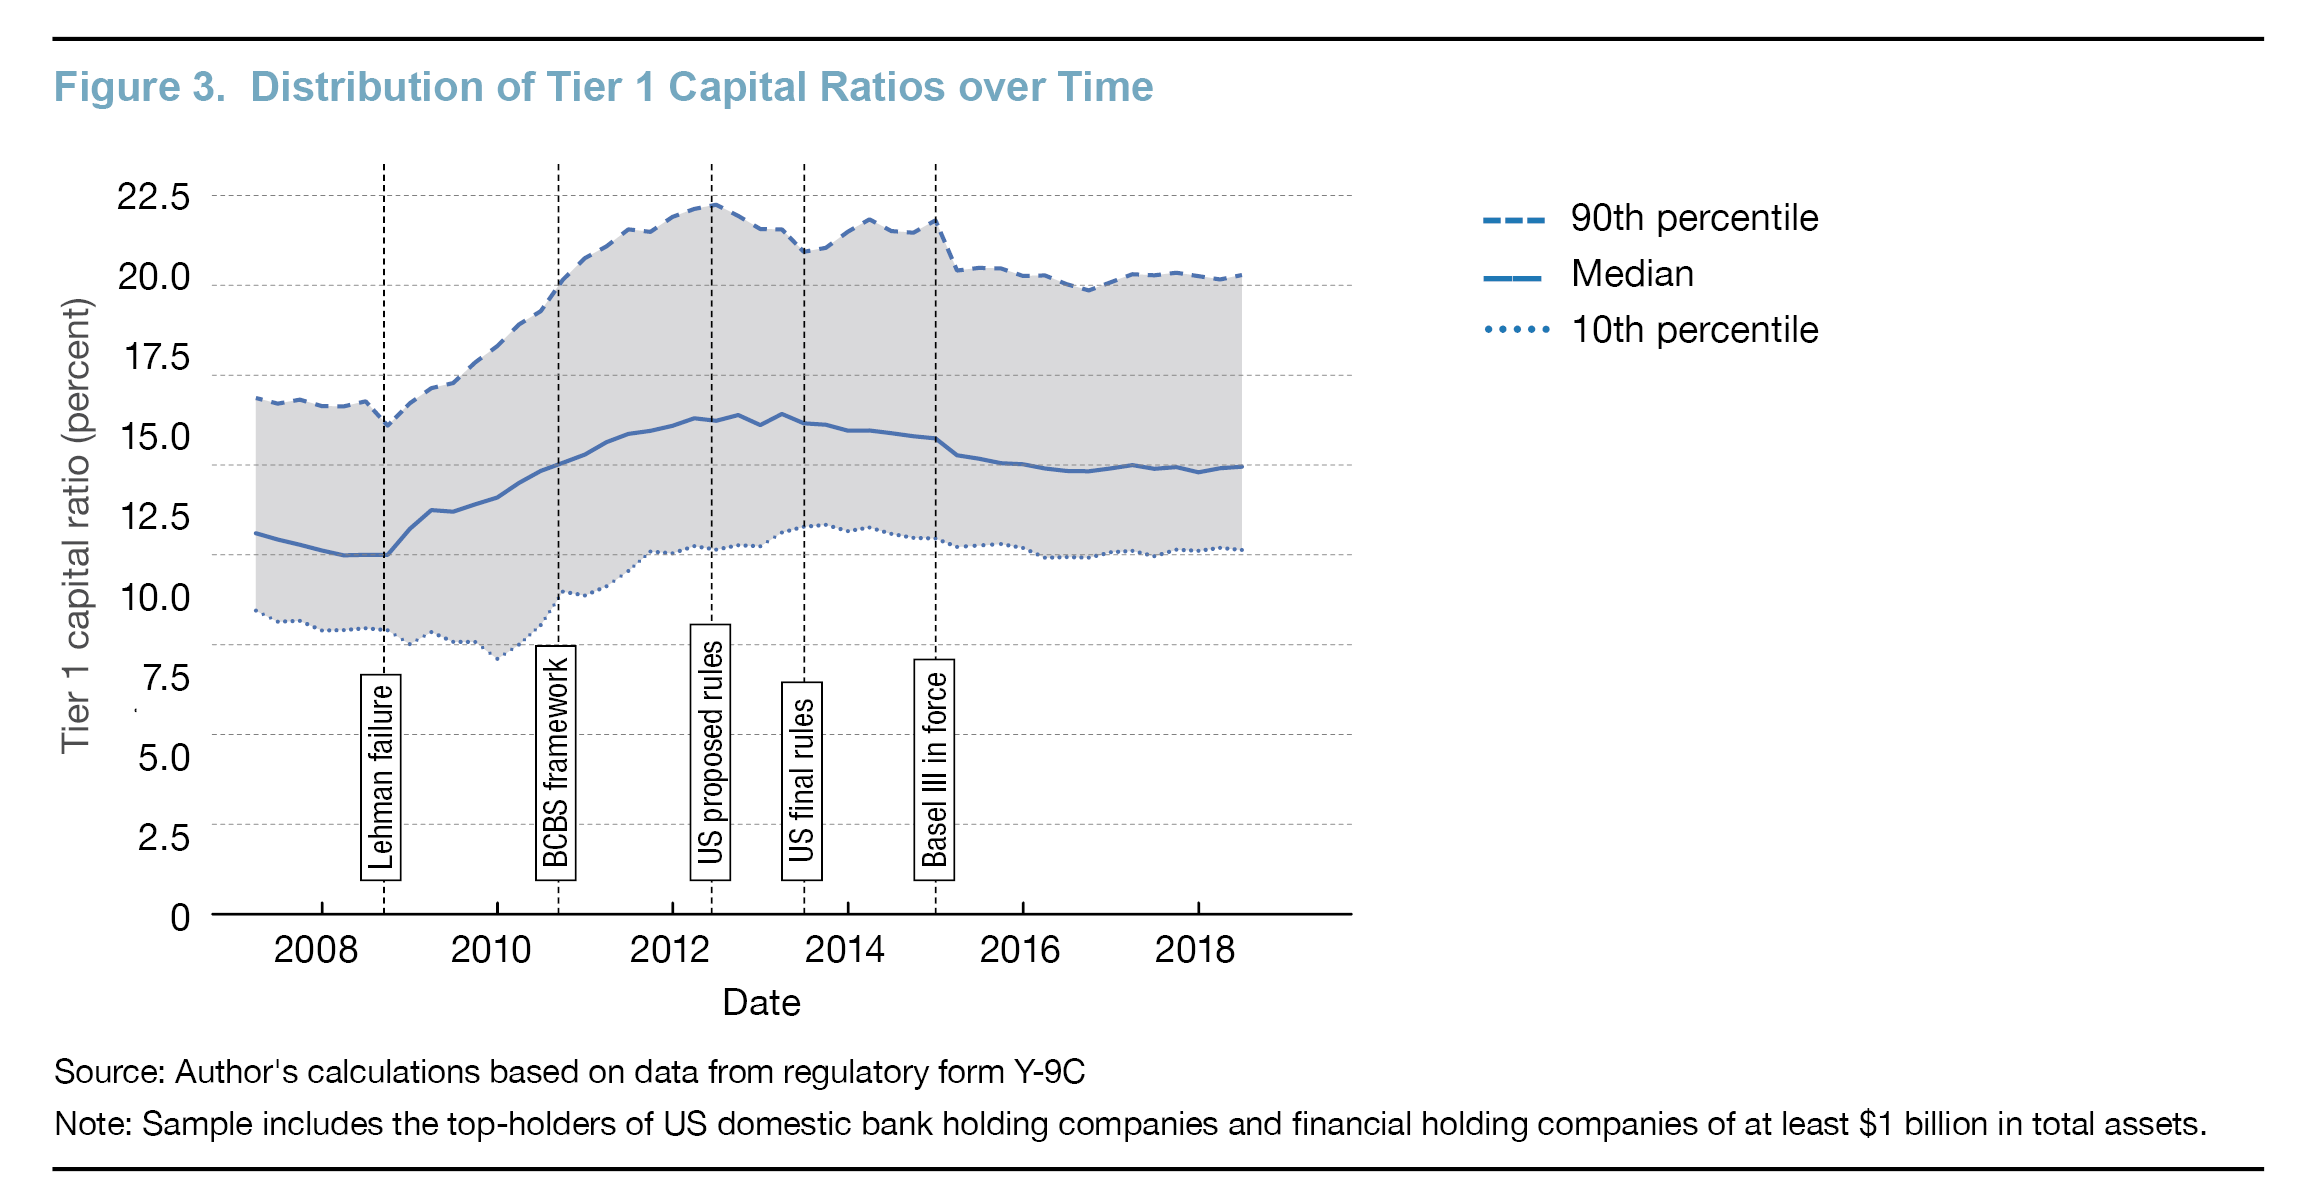 Figure 3. Distribution of Tier 1 Capital Ratios over Time